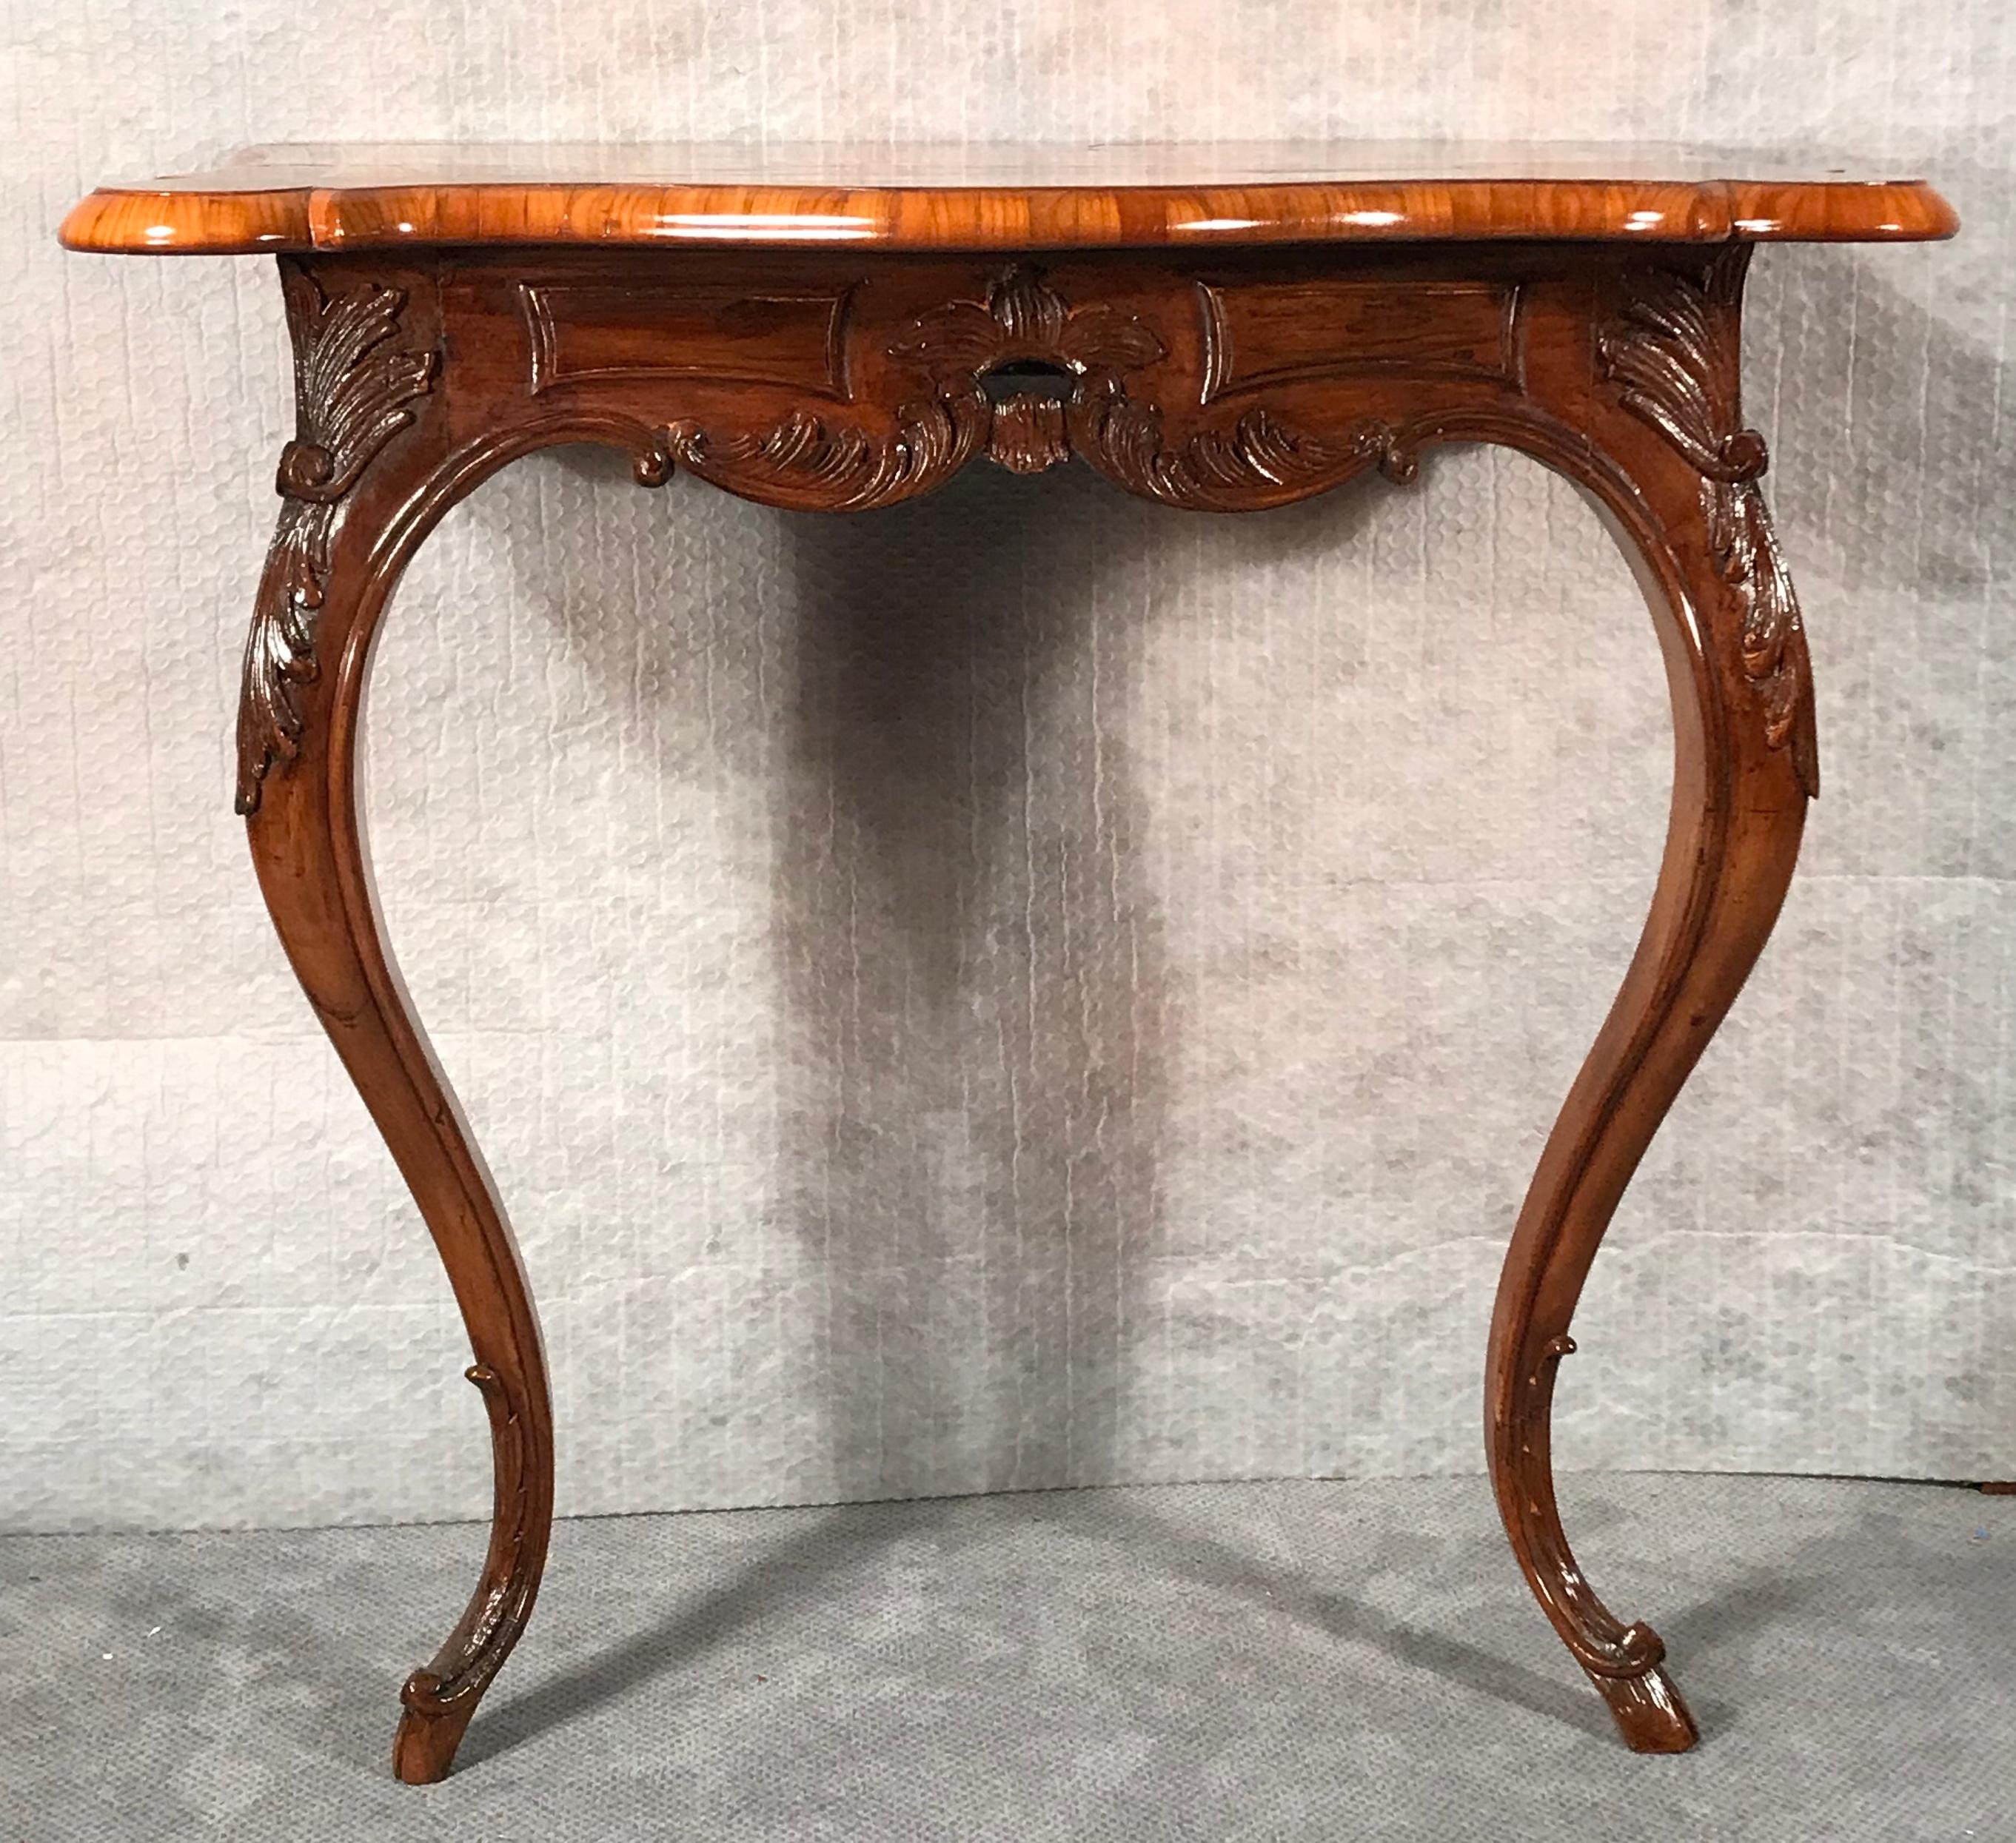 Original 18th century Baroque console table, South Germany 1750-1760, walnut and cherry veneer with bird’s-eye maple marquetry on the top. The walnut base has hand carved acanthus leave decorations. The console table is in very good refinished